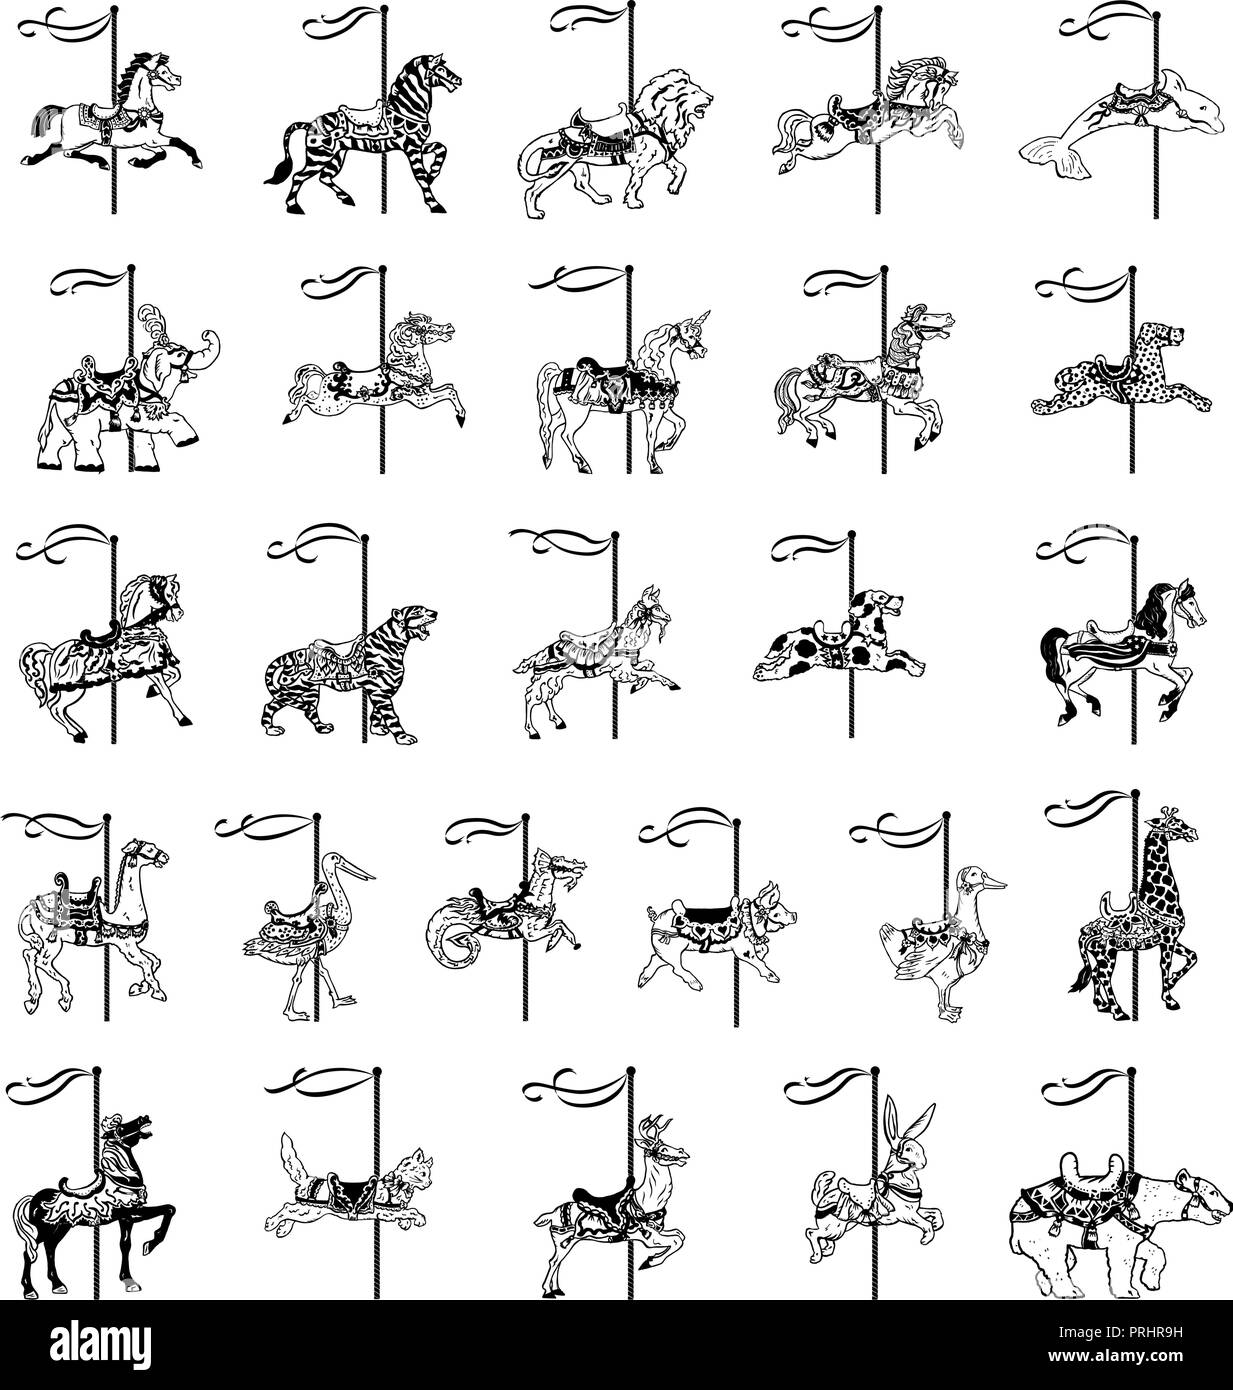 Carousel collection animale. Vector Illustration.. Collection Illustration de Vecteur